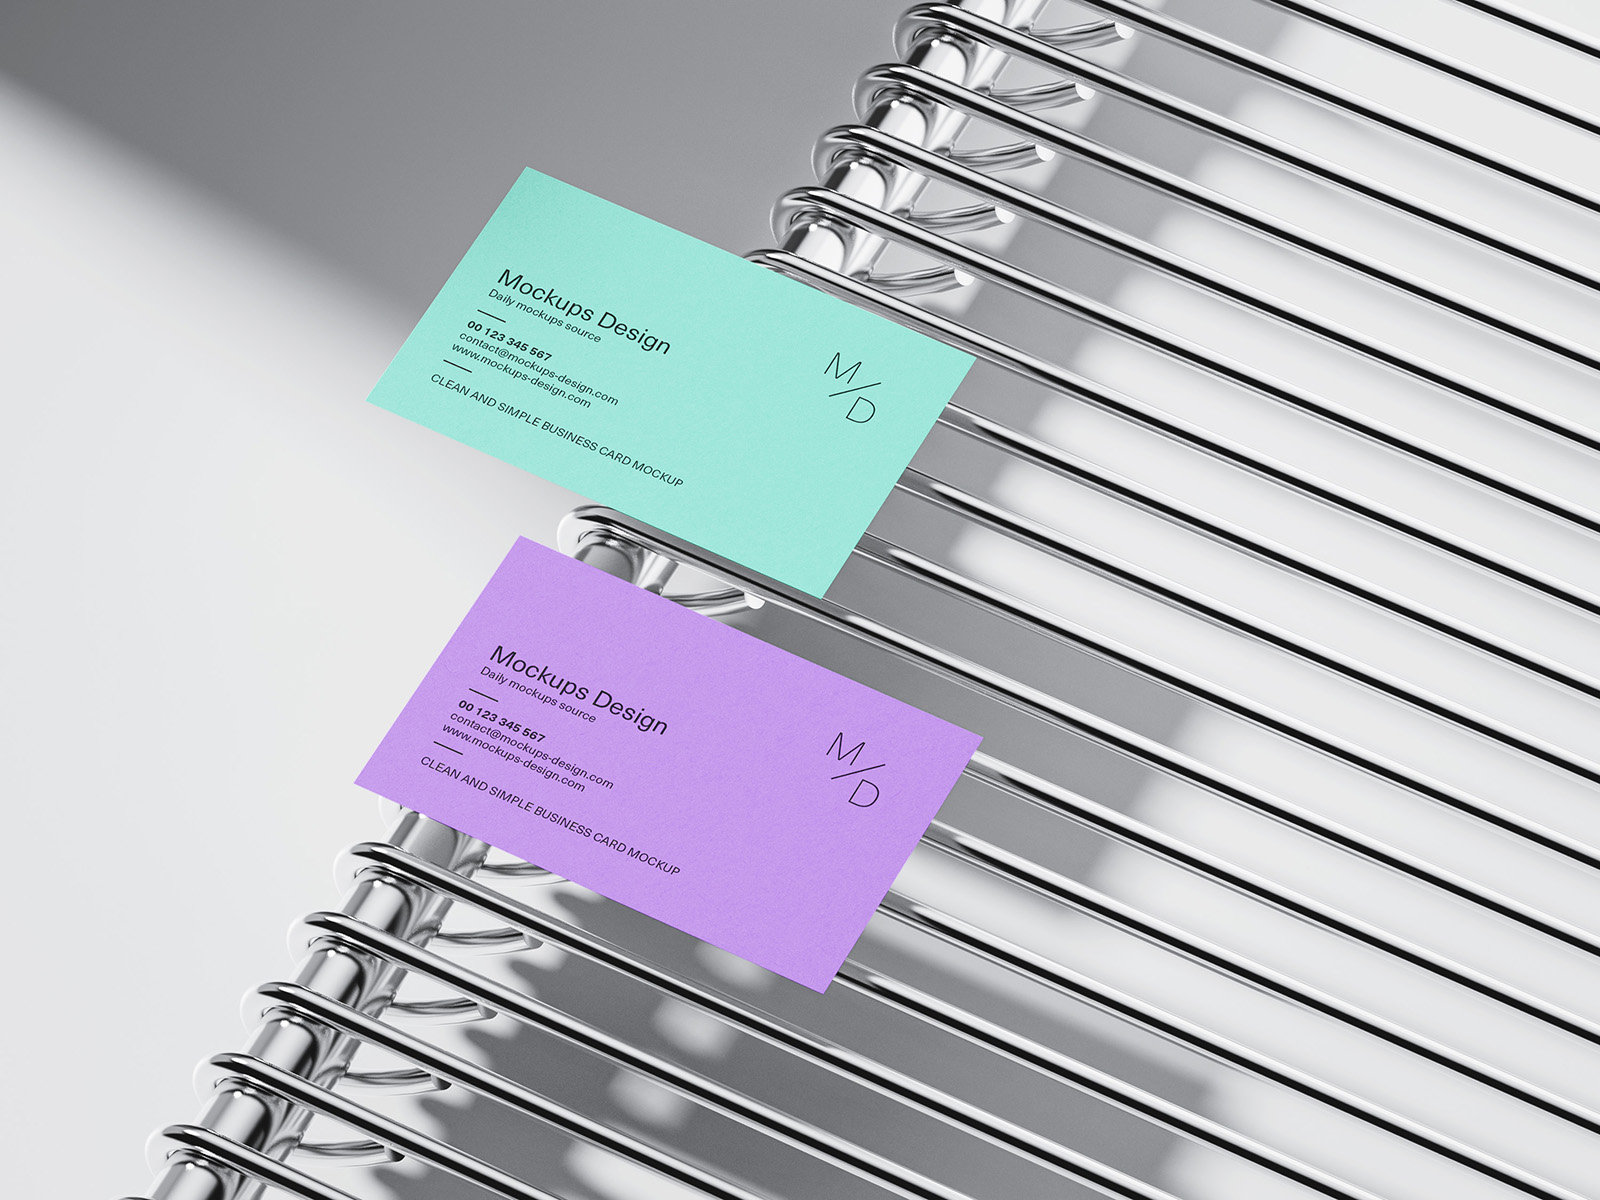 Business Card Mockup in 5 angles on the Metal Grid FREE PSD